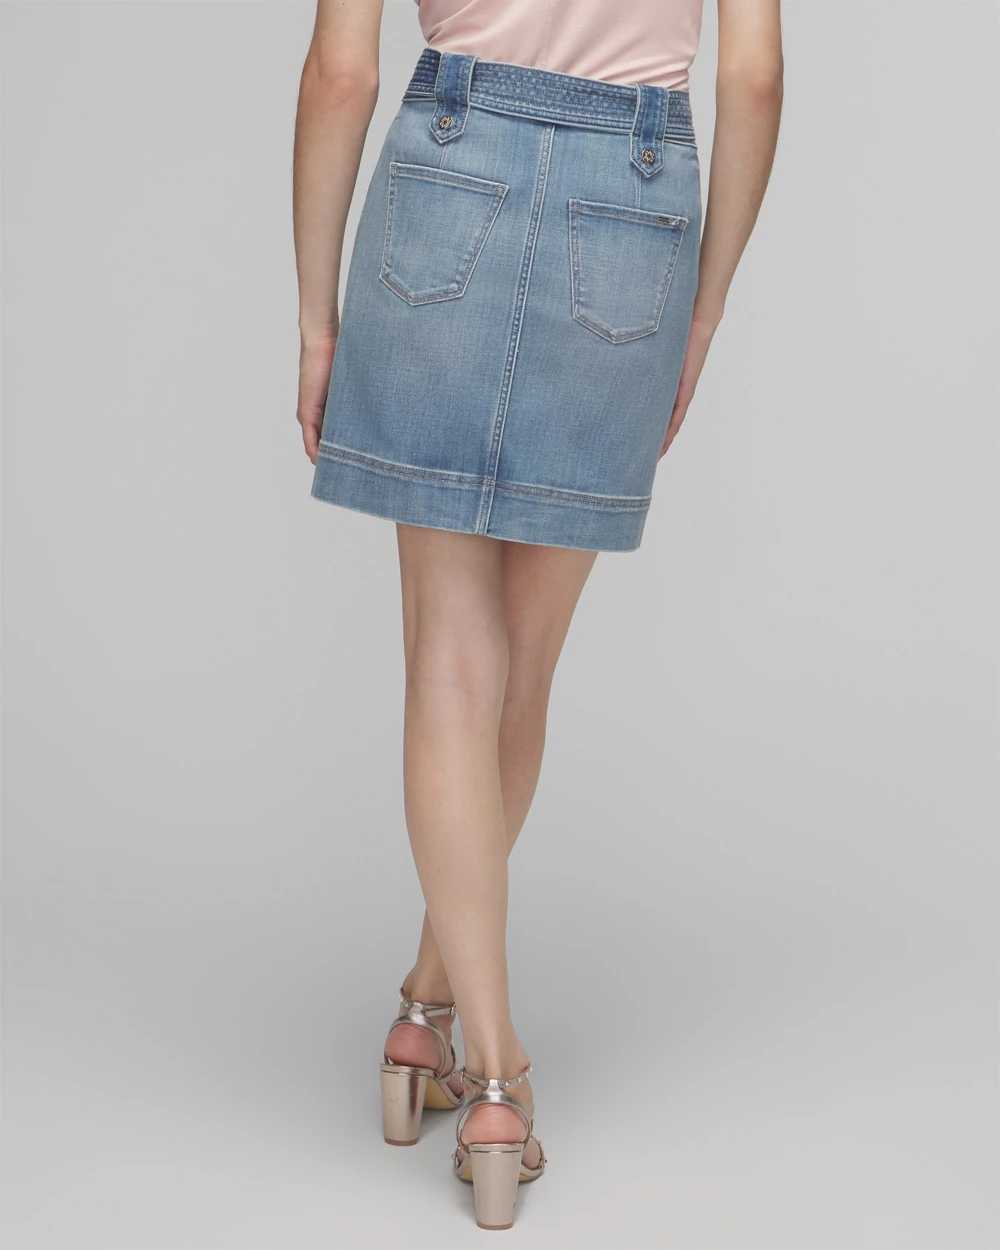 Denim Utility Boot Skirt click to view larger image.